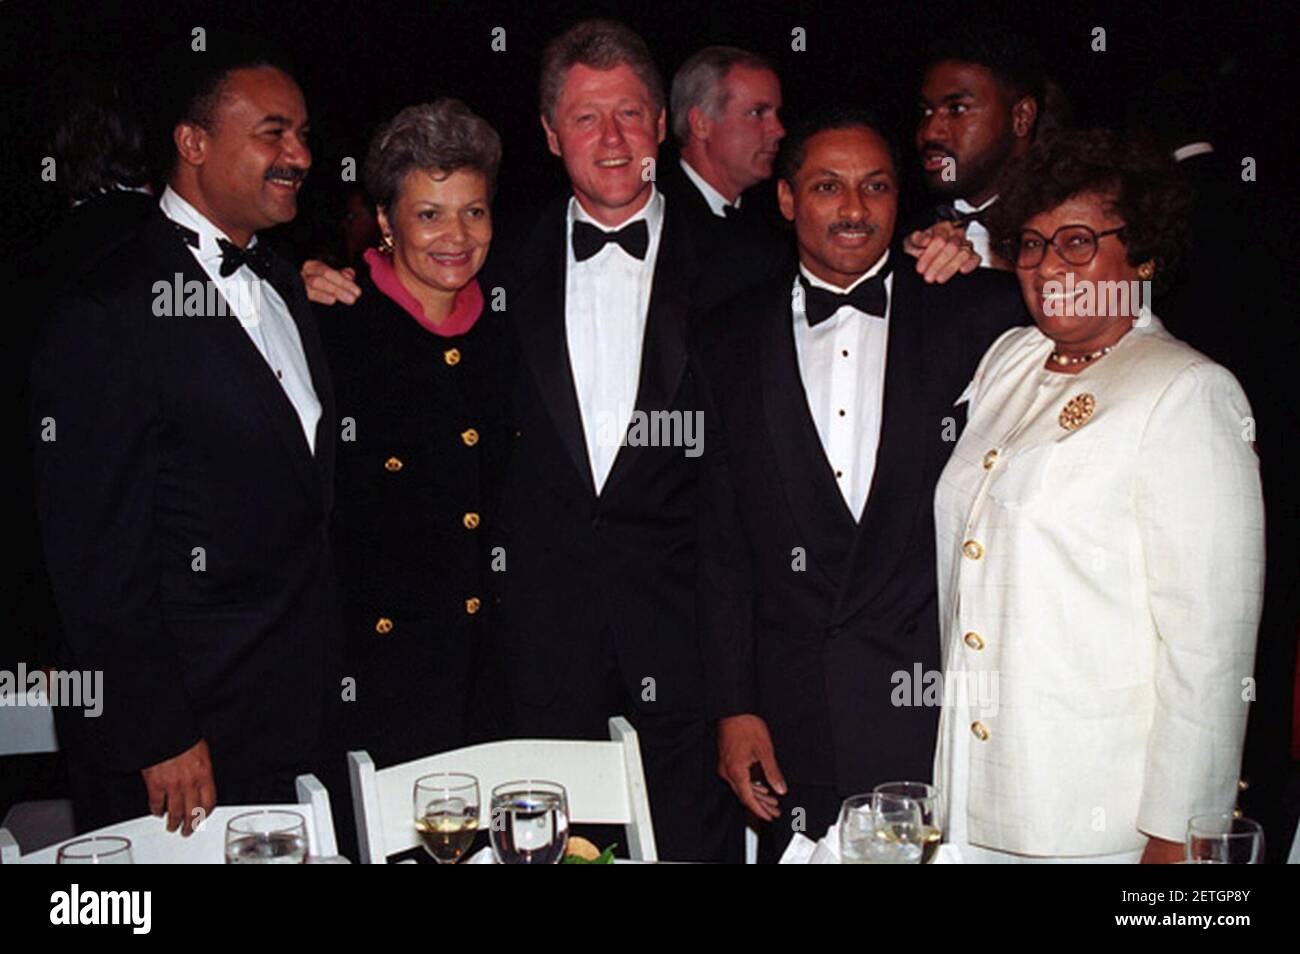 Photograph of President William J. Clinton Posing with Members of His Administration at the Congressional Black Caucus Dinner. Stock Photo